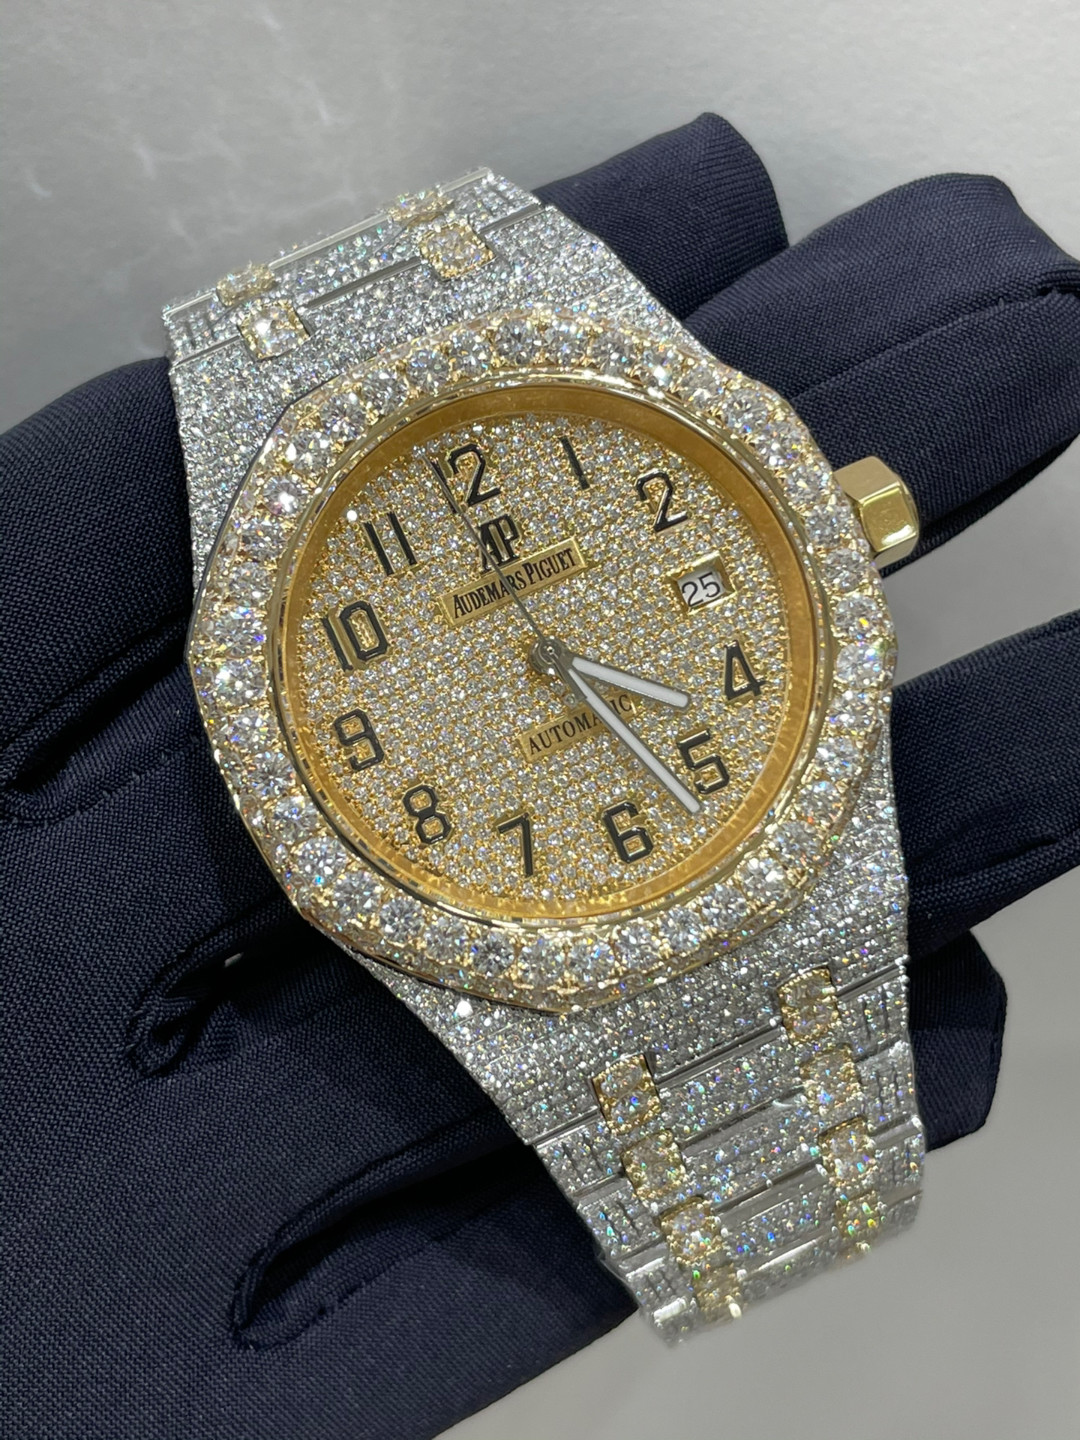  Skeleton Men Lab Diamond Wrist Watch Swiss Moment Moissanite Studded Iced Out Manufactures